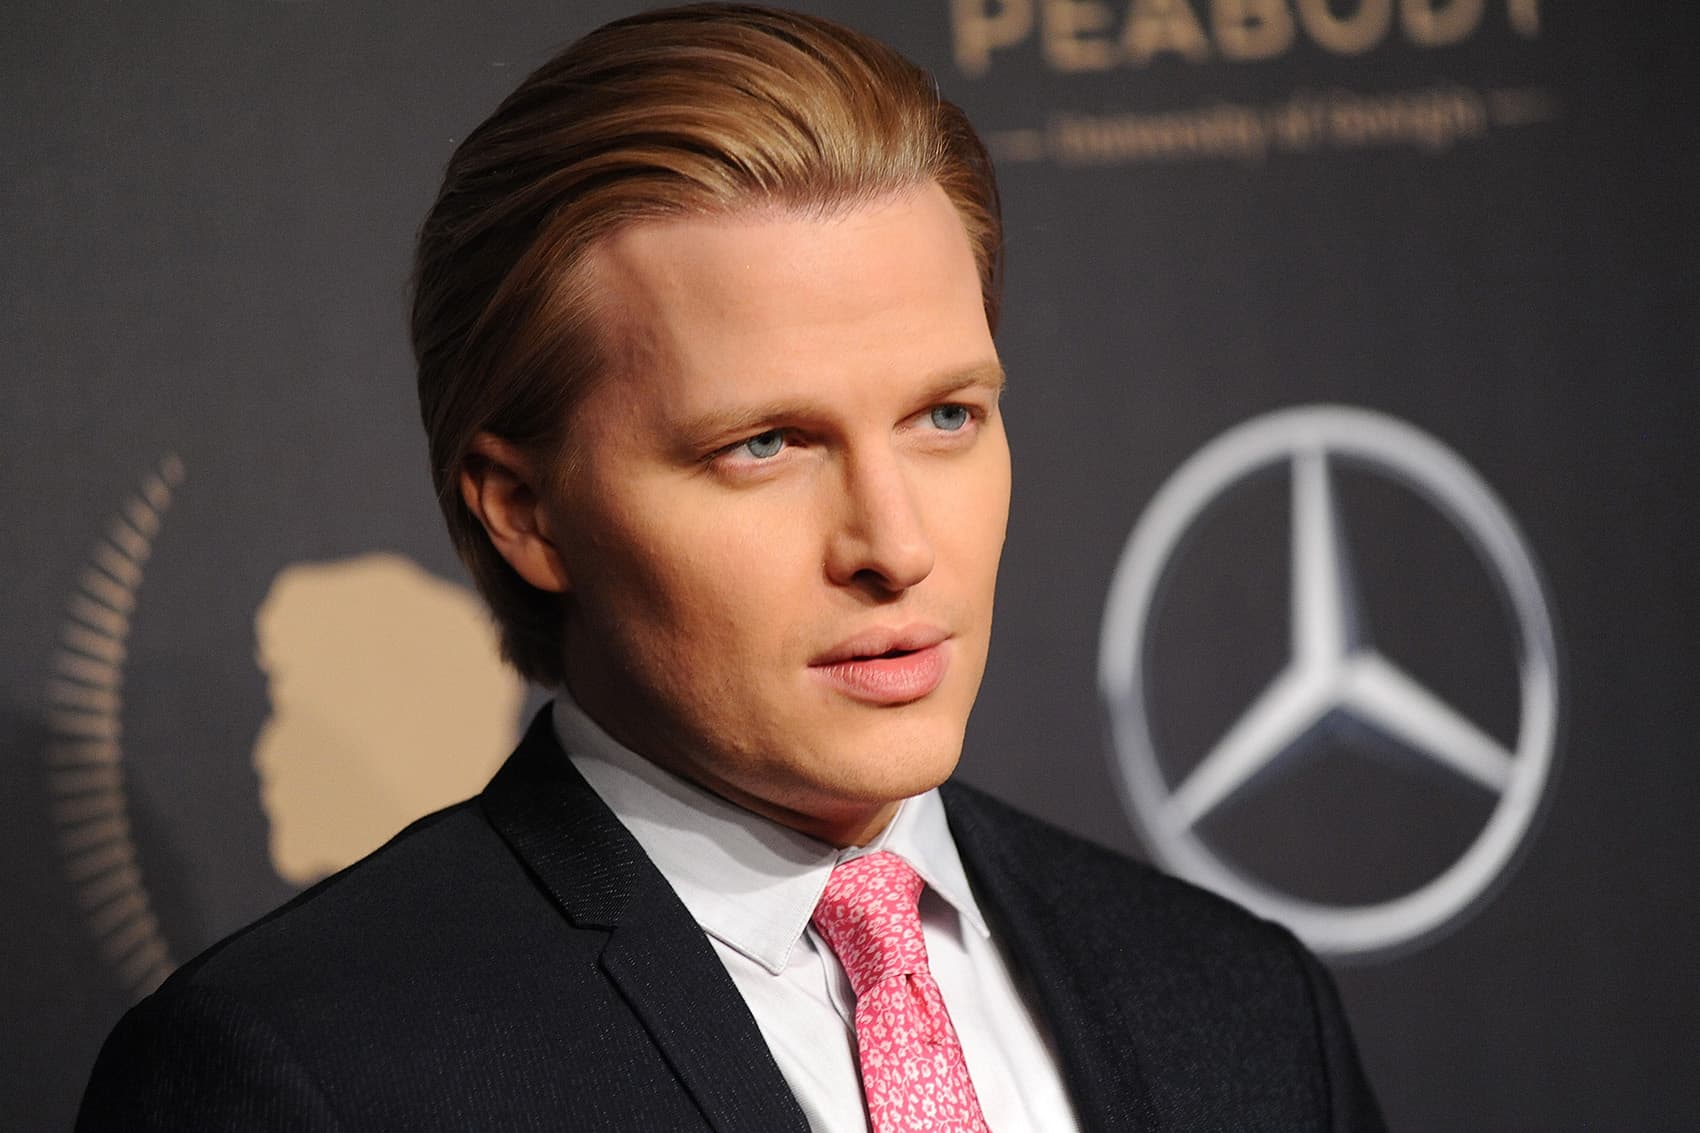 Ronan Farrow And The Revelations Of Reporting On Predators On Point